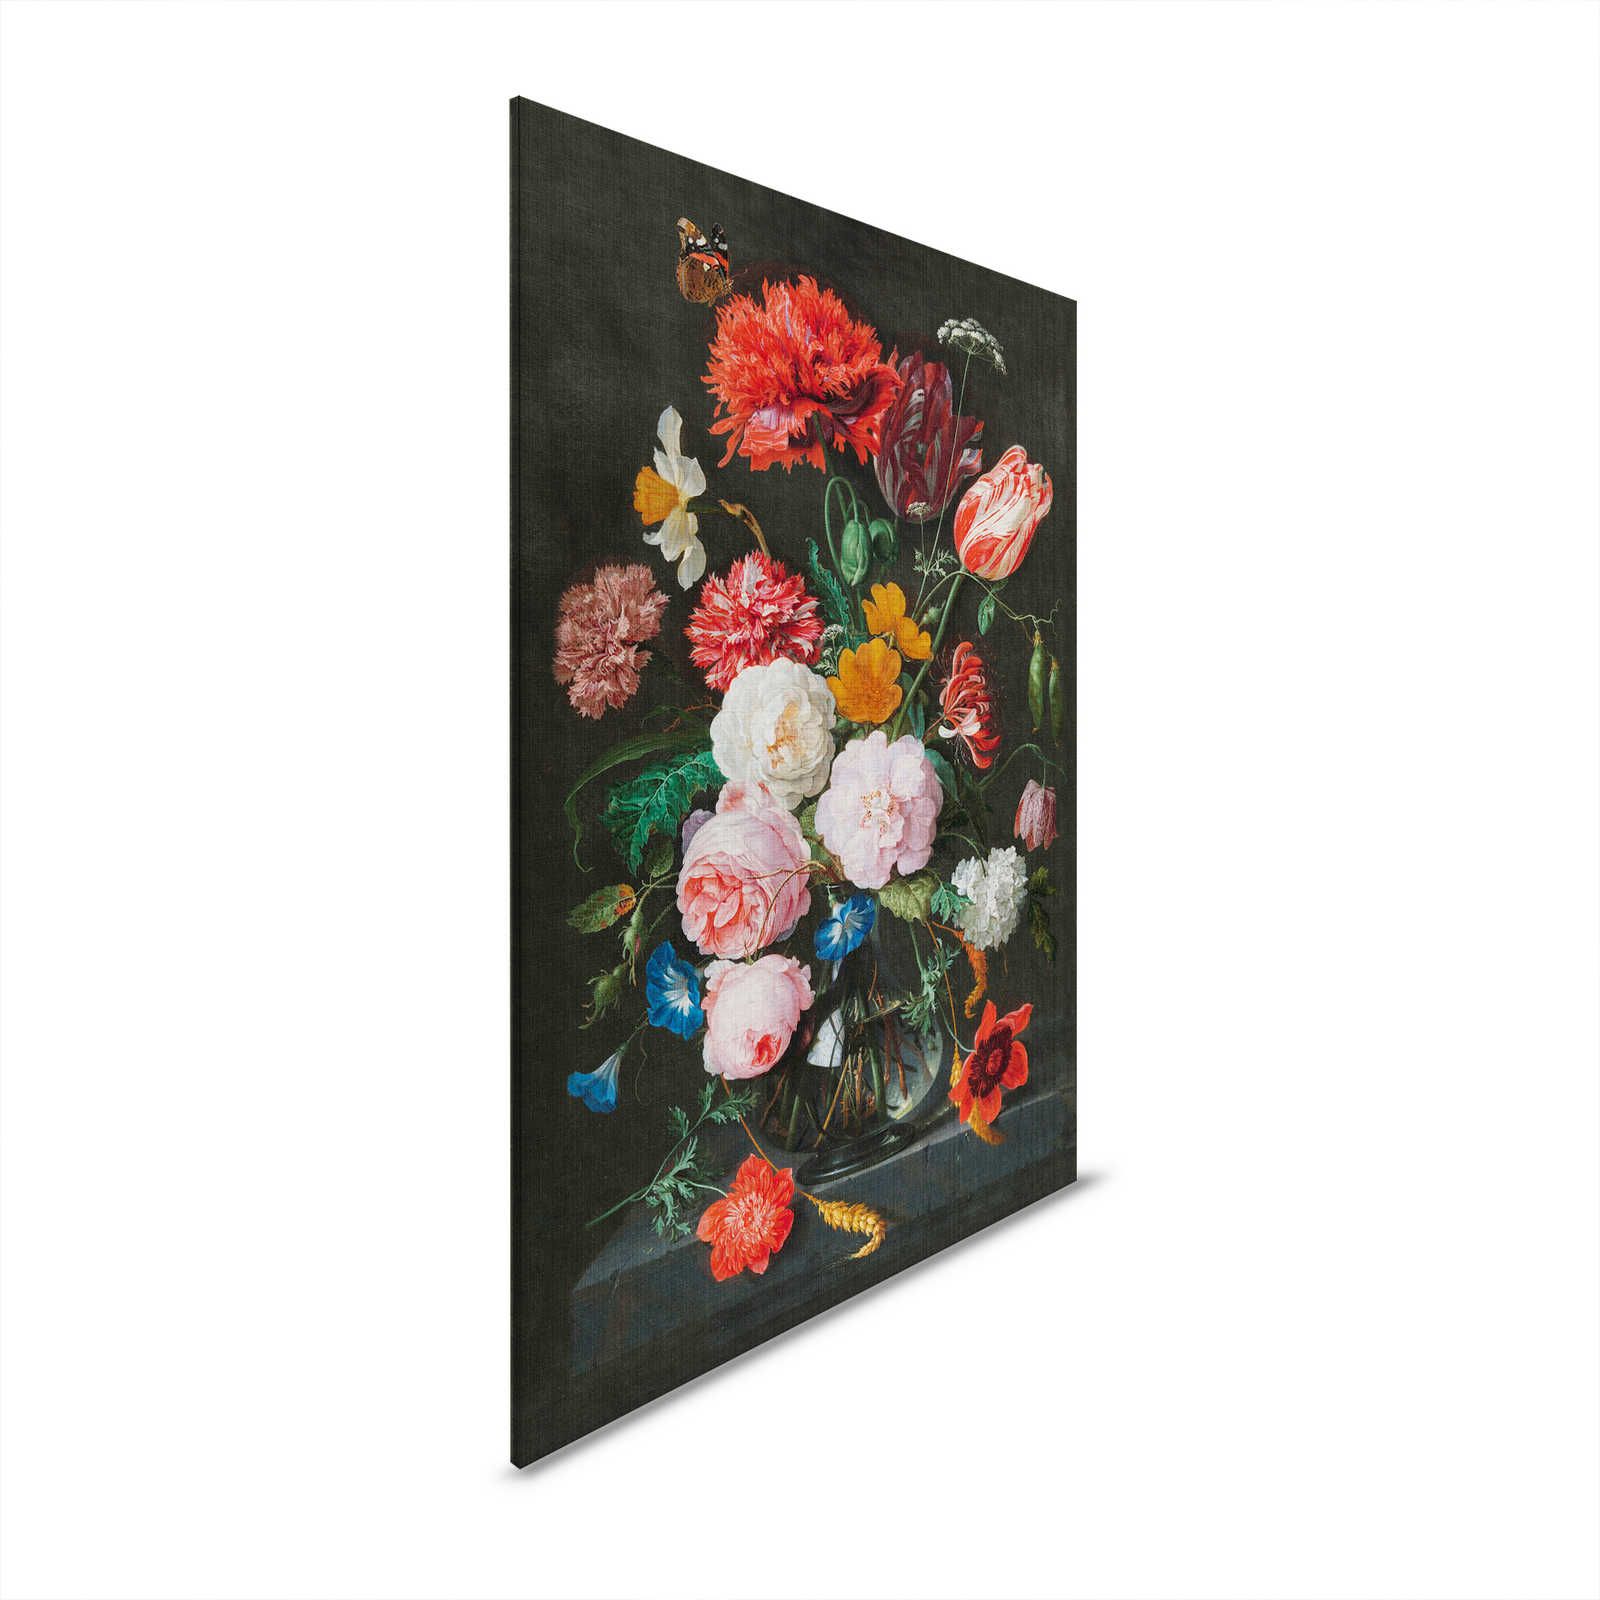         Artists Studio 4 - Canvas painting Flowers Still Life with Roses - 0,60 m x 0,90 m
    